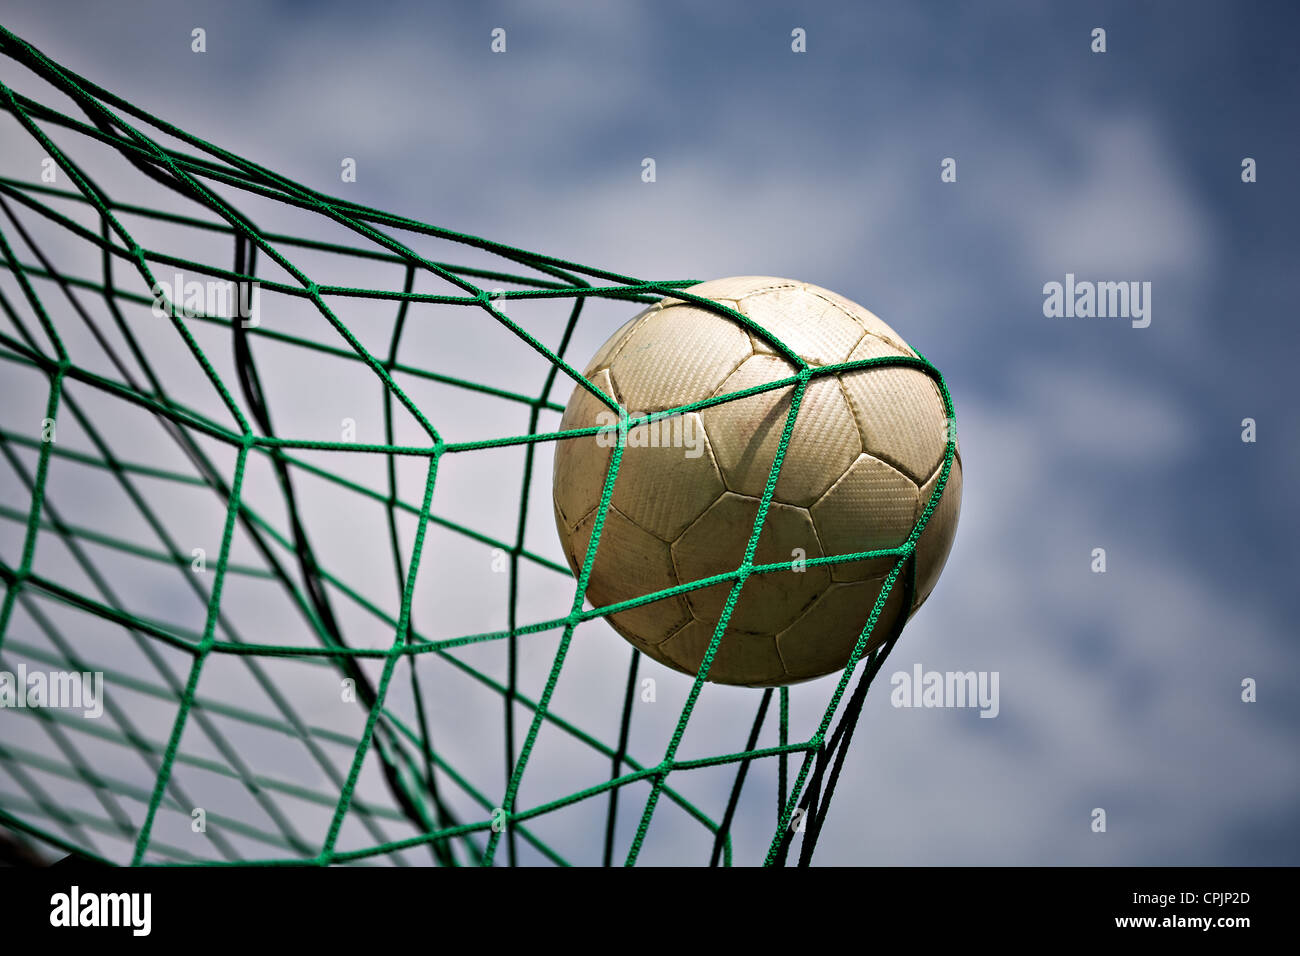 symbolic picture for goal with a soccer ball in net Stock Photo